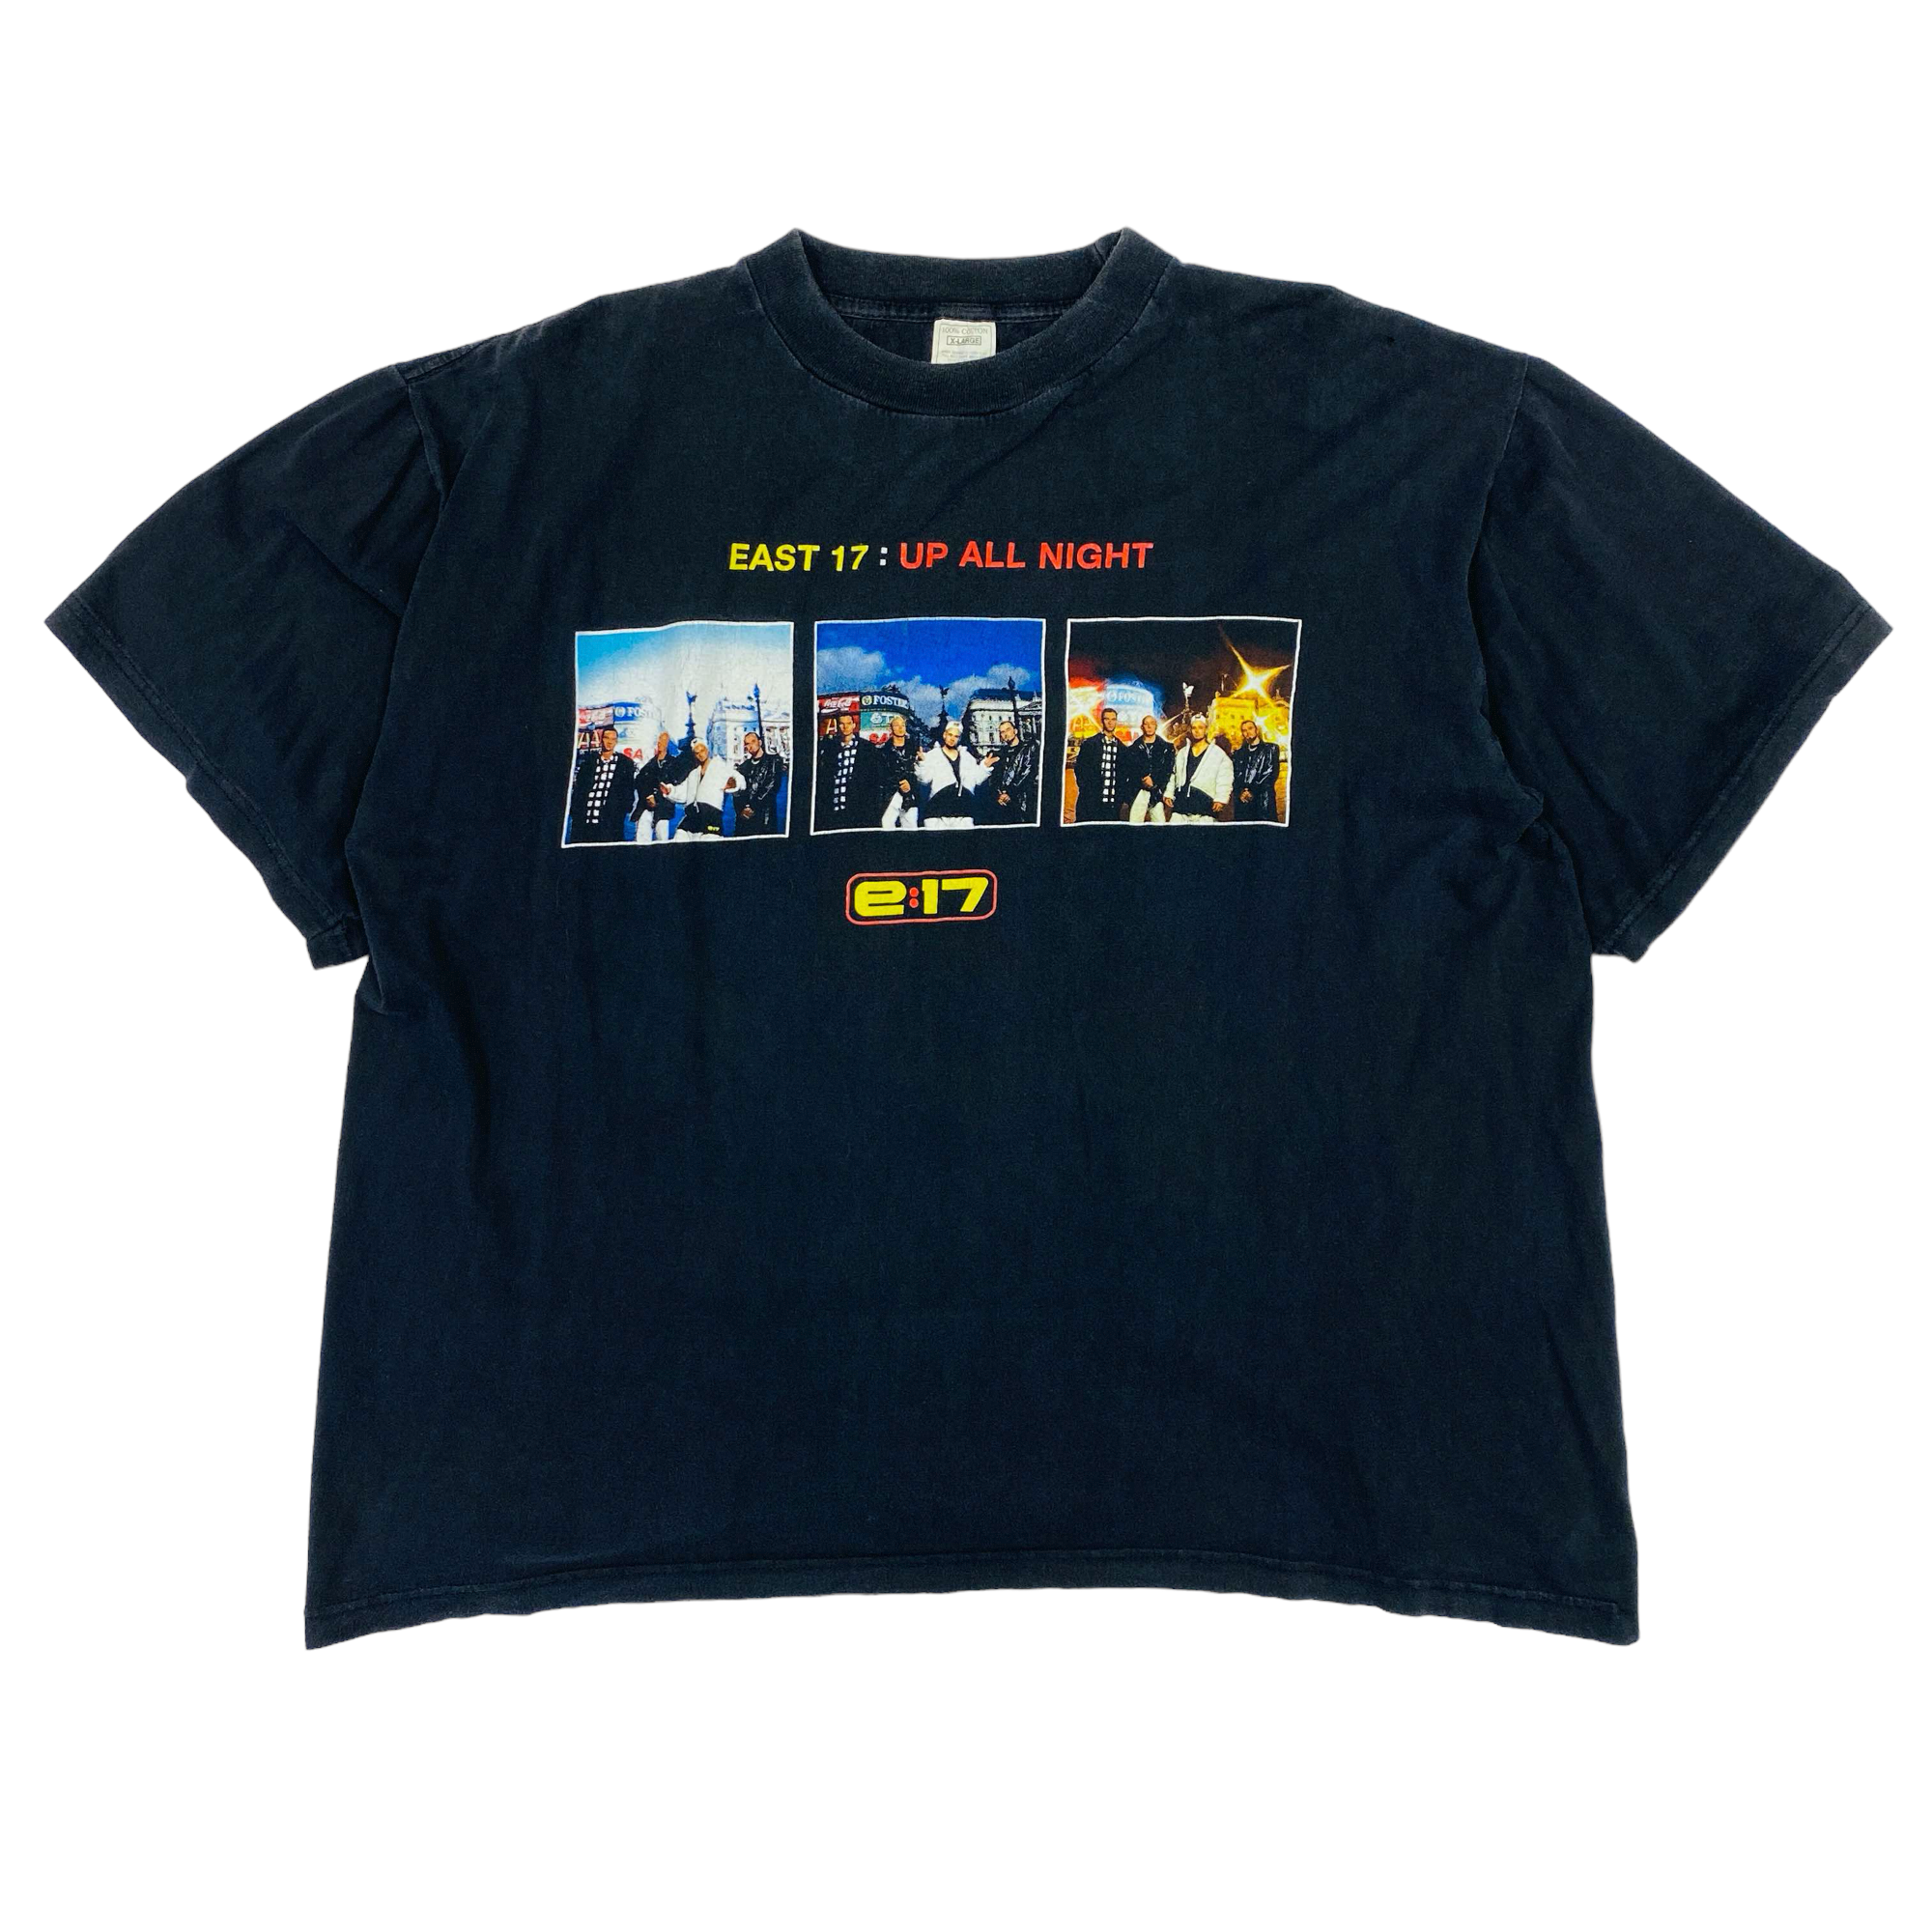 East 17: Up All Night T-Shirt - Large